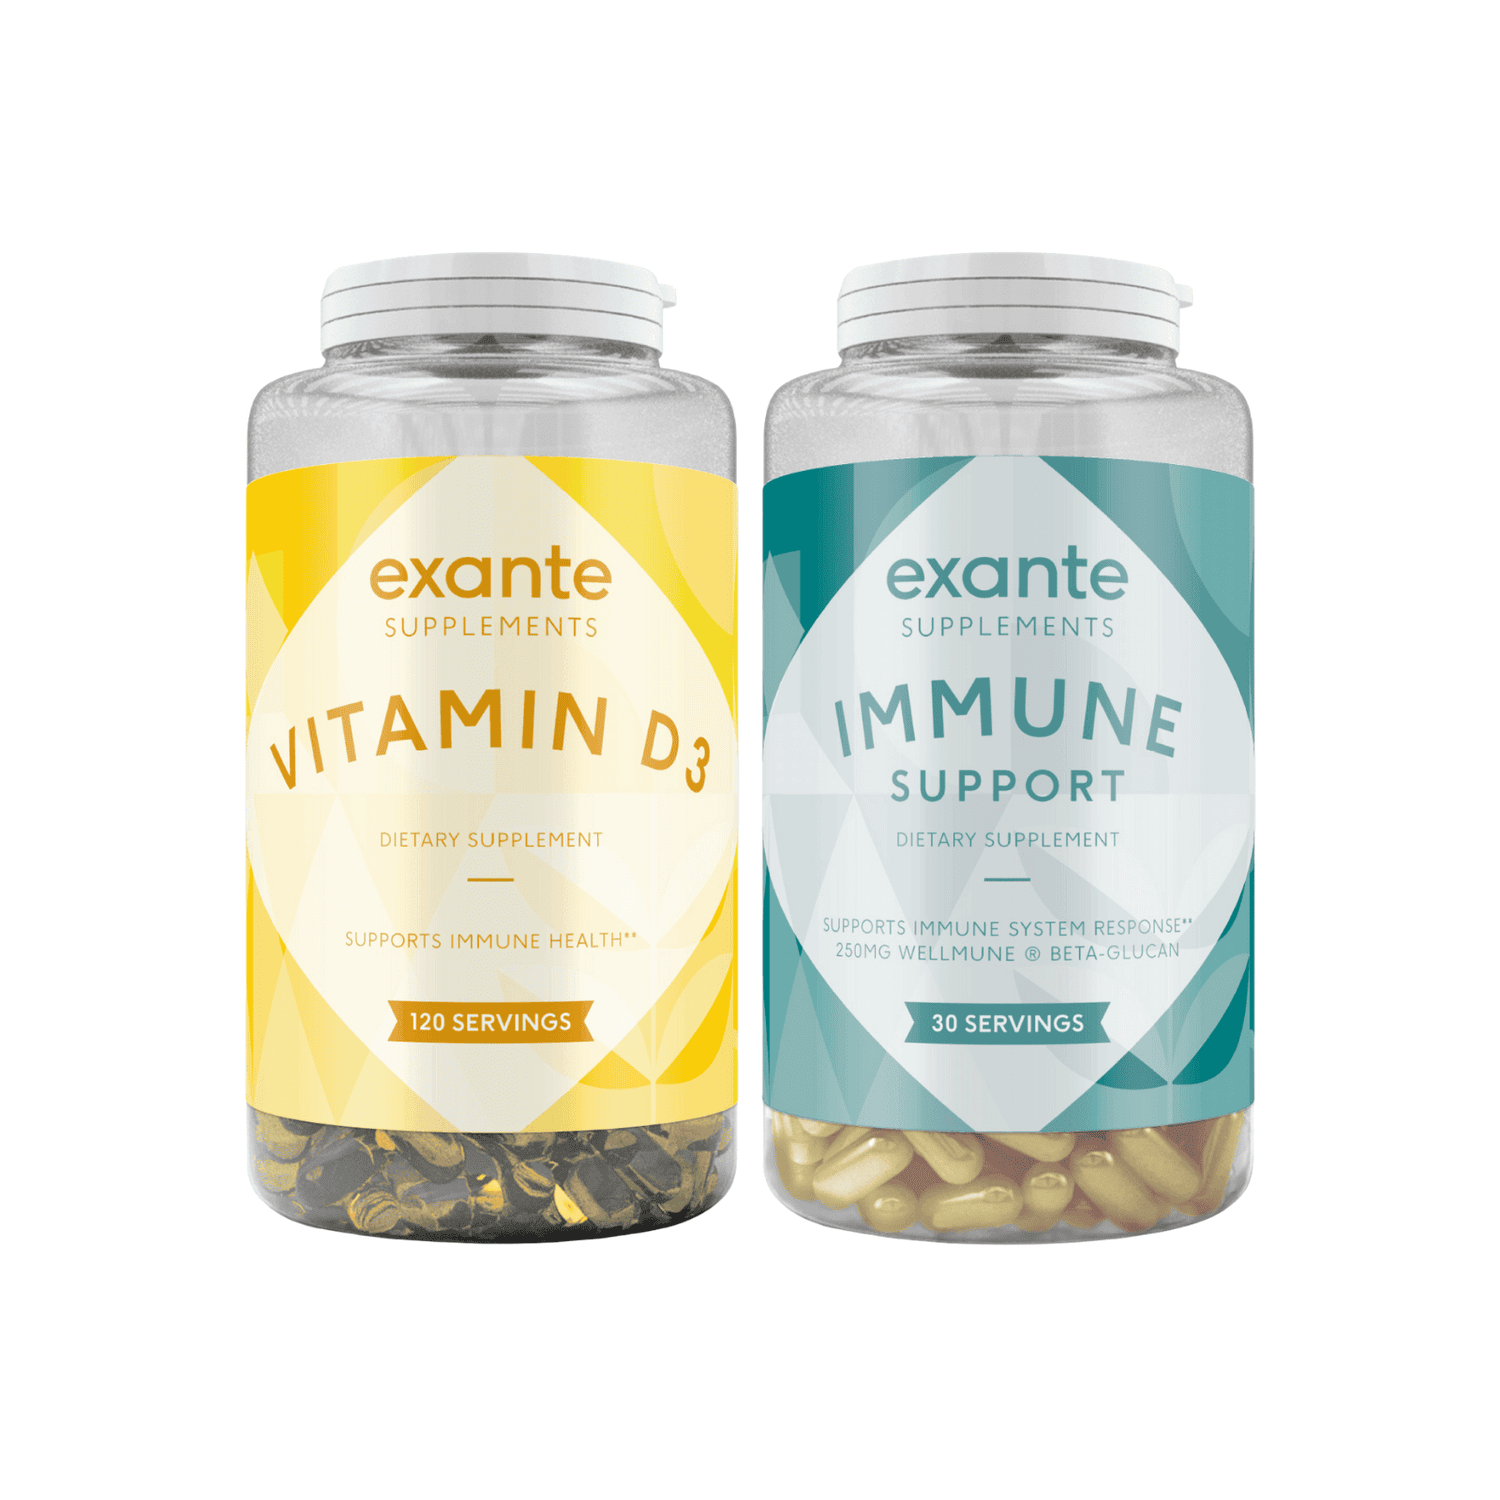 The Immune Support Bundle